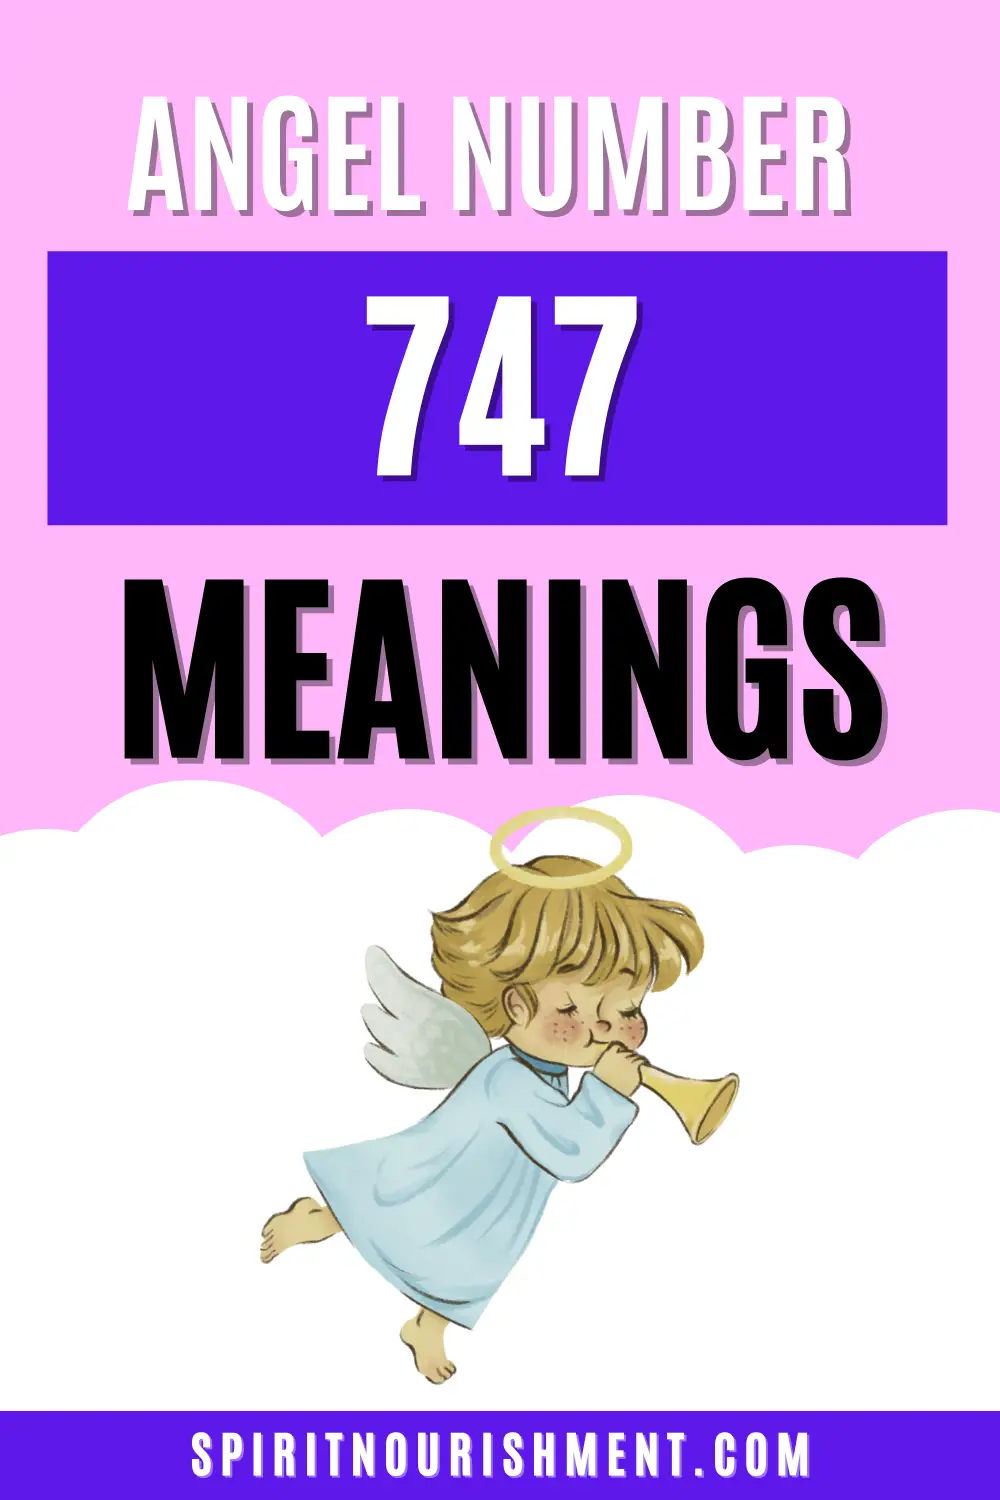 Angel Number 747 Meaning A Beautiful Connection to the Universe